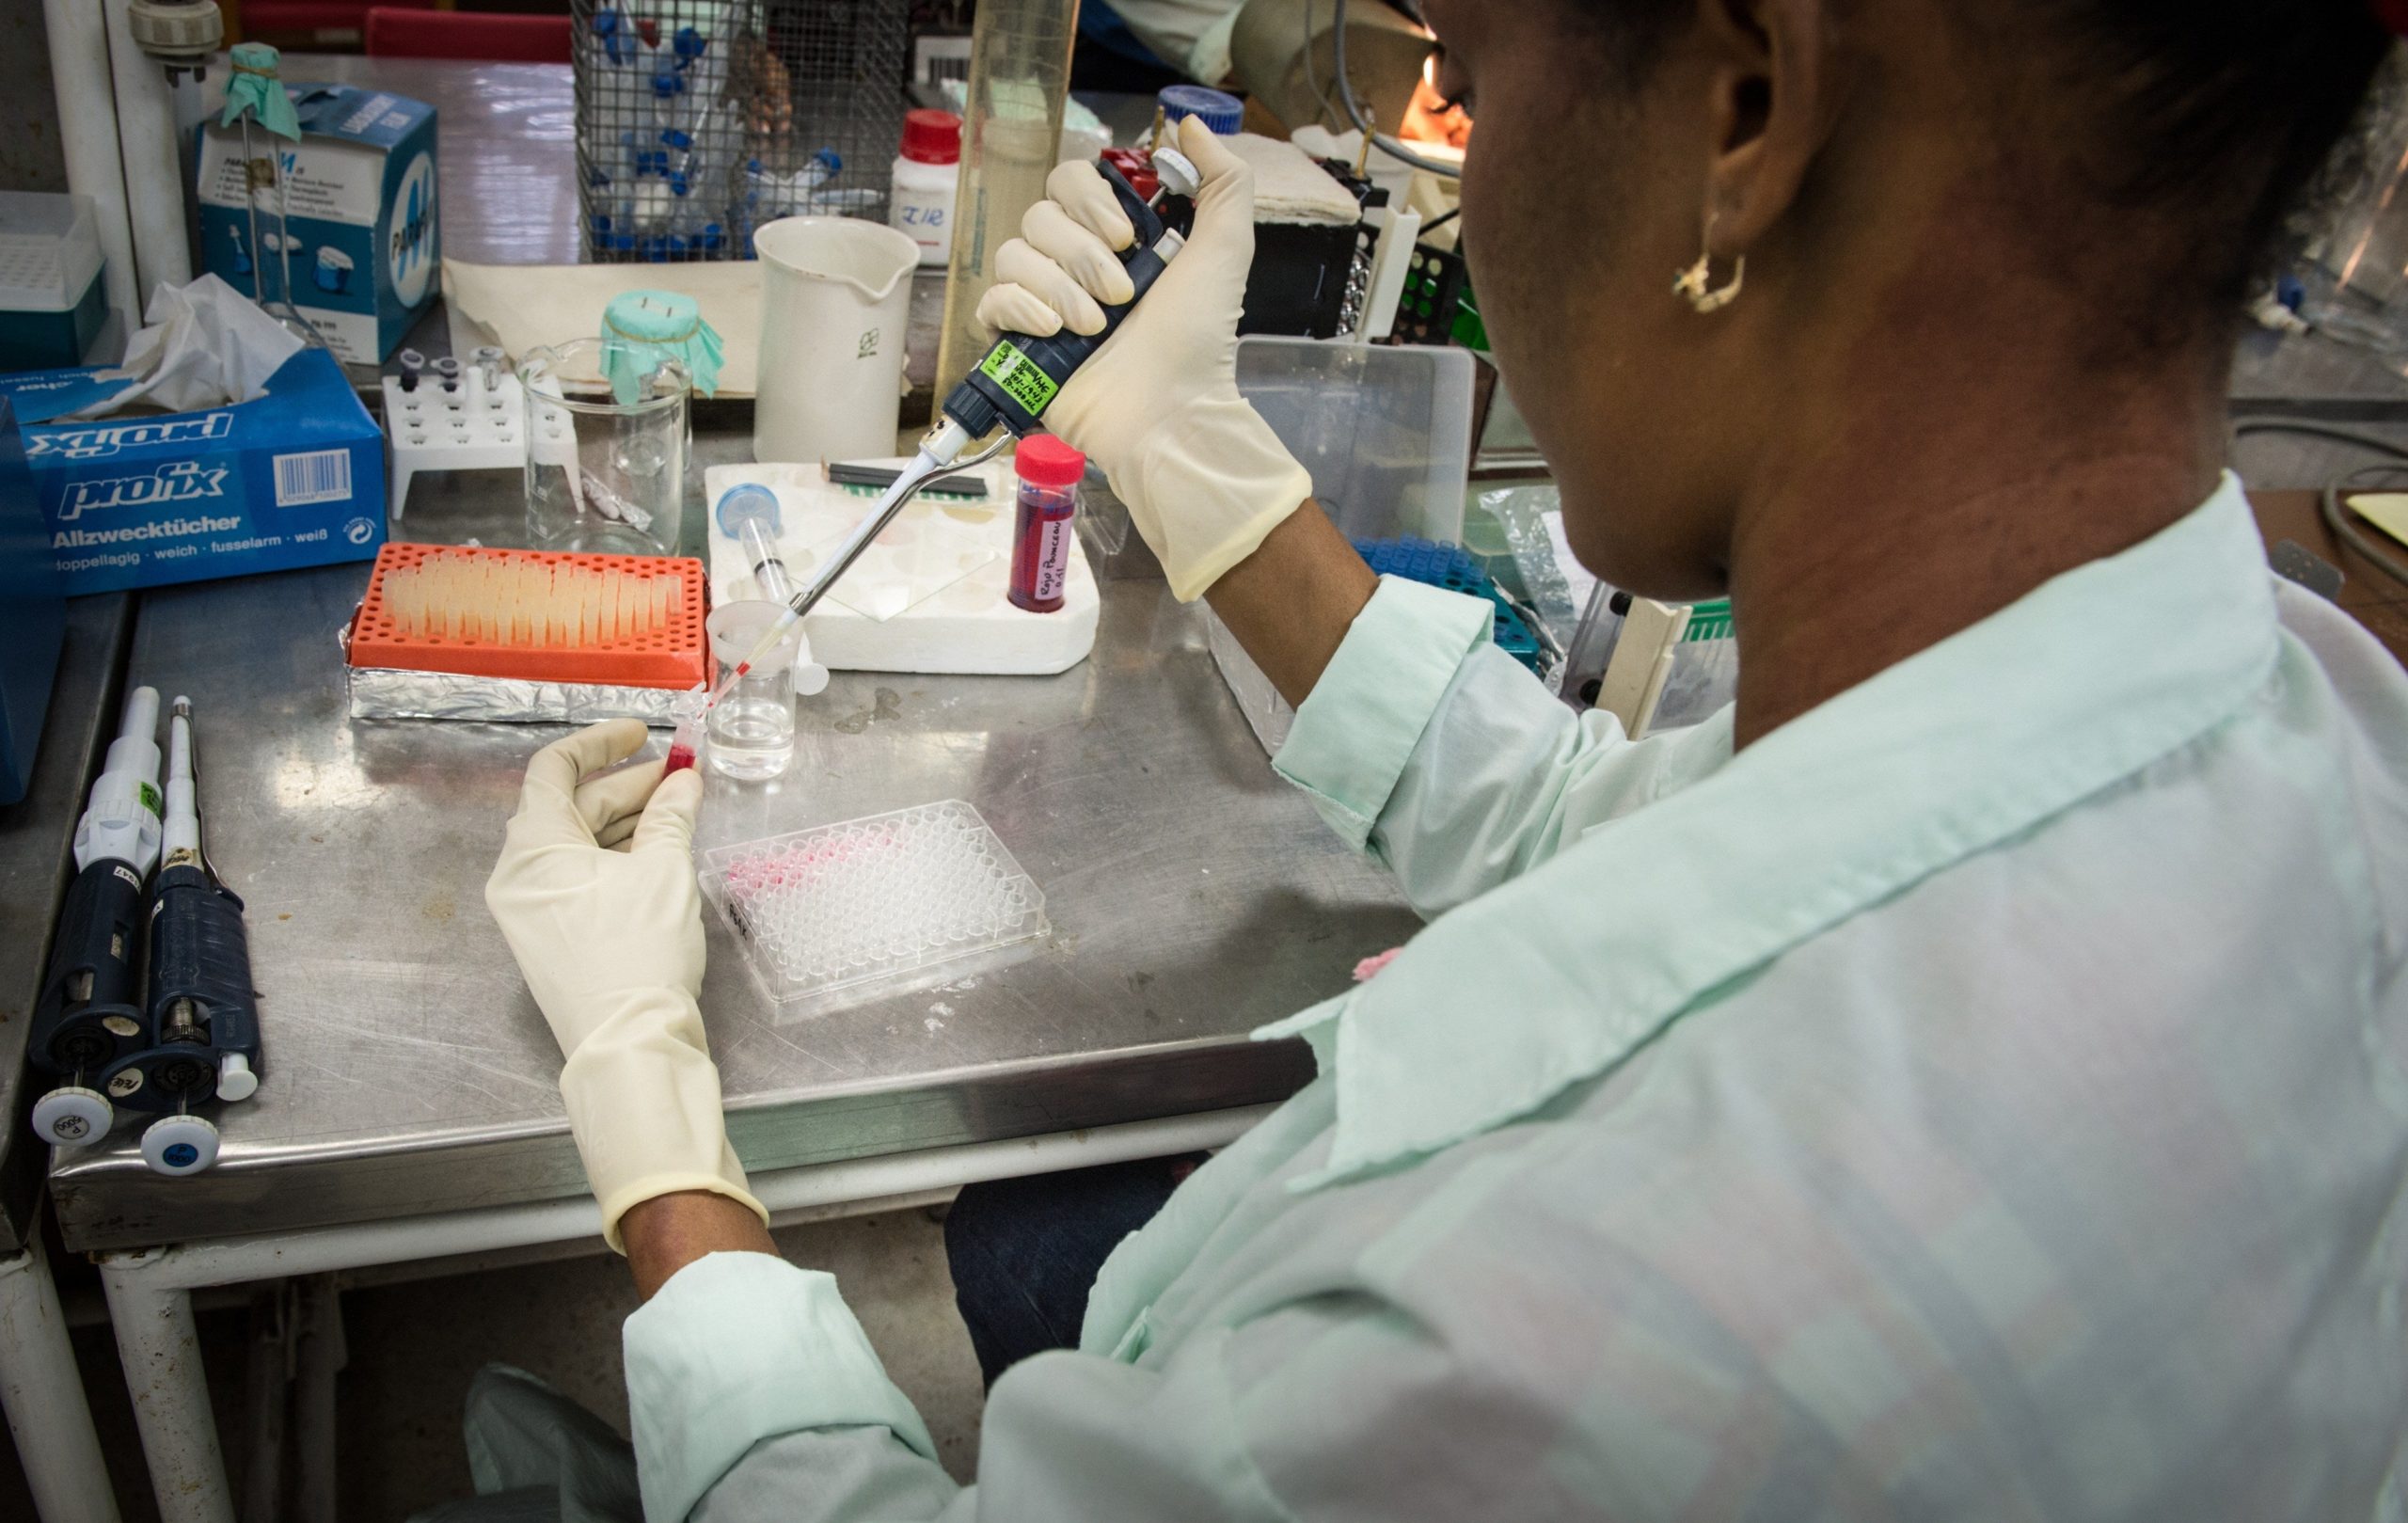 A brown-skinned woman wearing a white lab coat and white gloves is sitting at a laboratory table with a syringe in one hand and a small container in the other